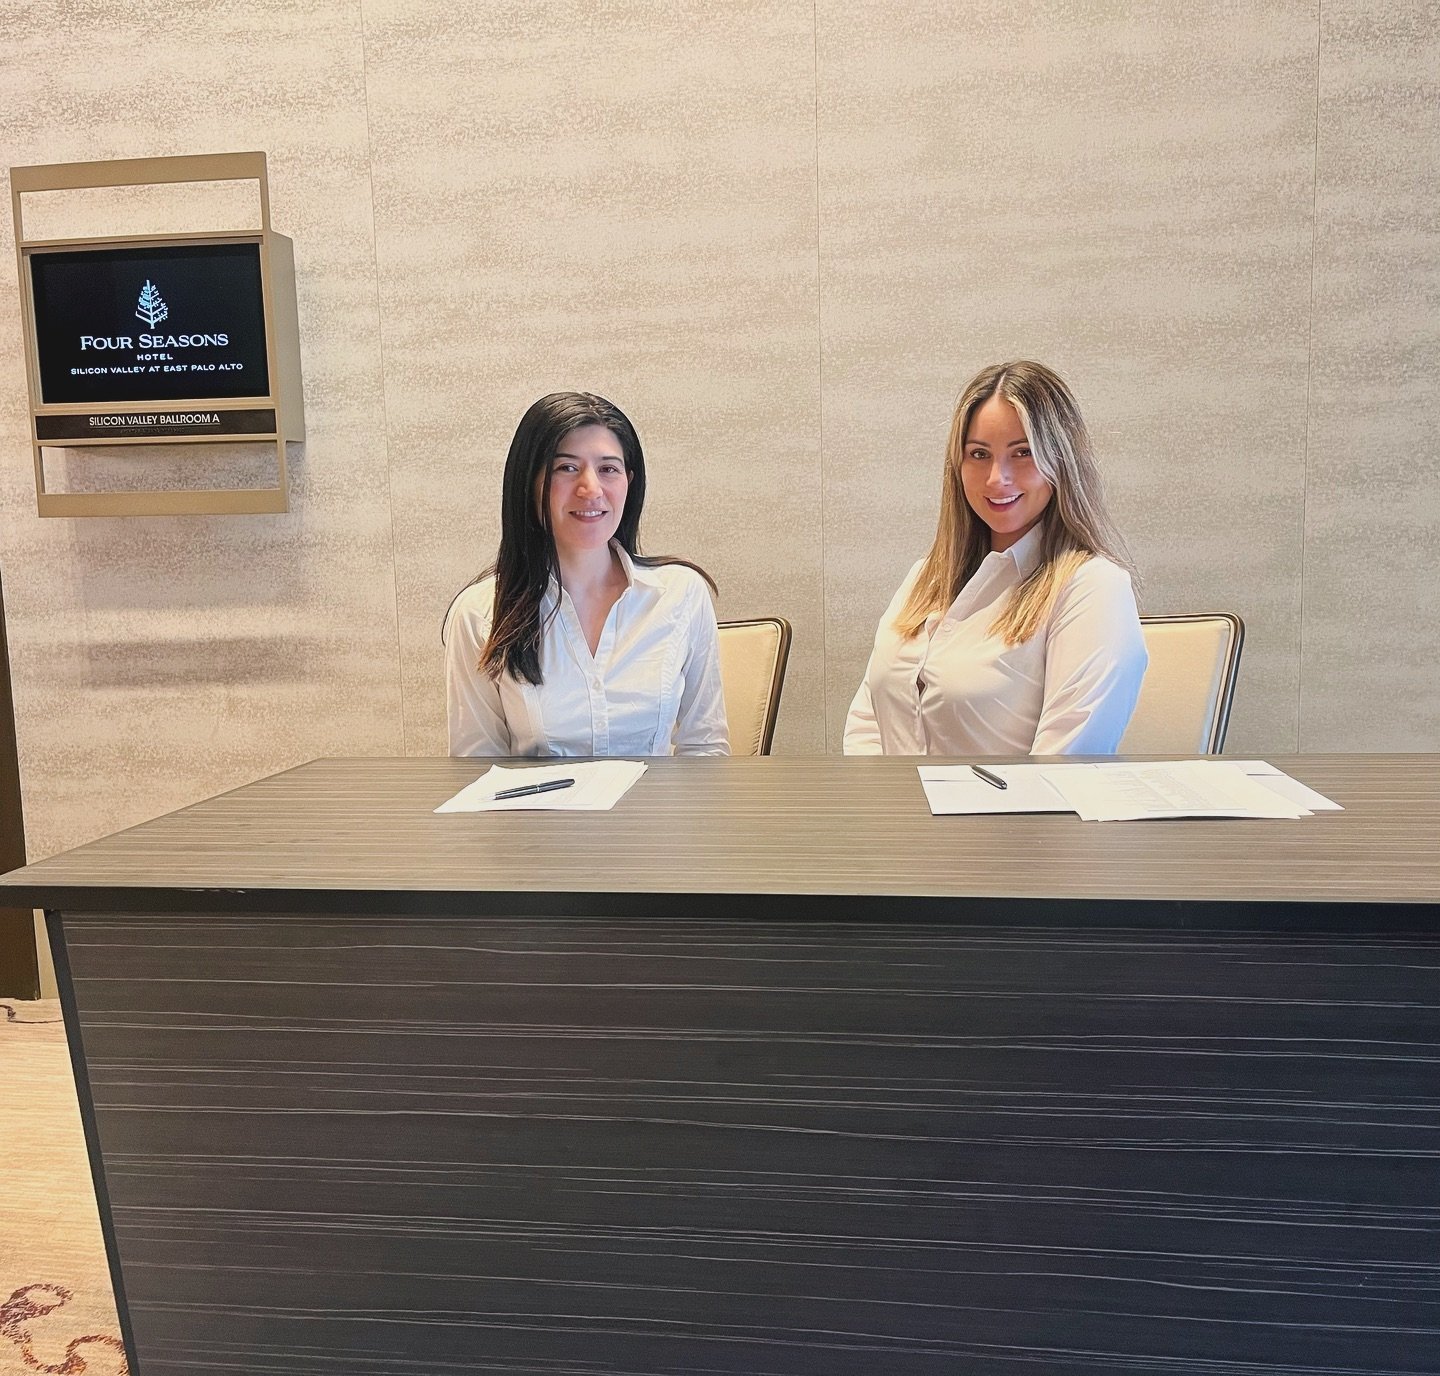 Our team assisting with registration during @tronicaexpo 📟
📍San Francisco, CA
.
.
#tronicaexpo #sanfrancisco #fourseasonshotel #expo #conference #hostesses #models #blossomtalent